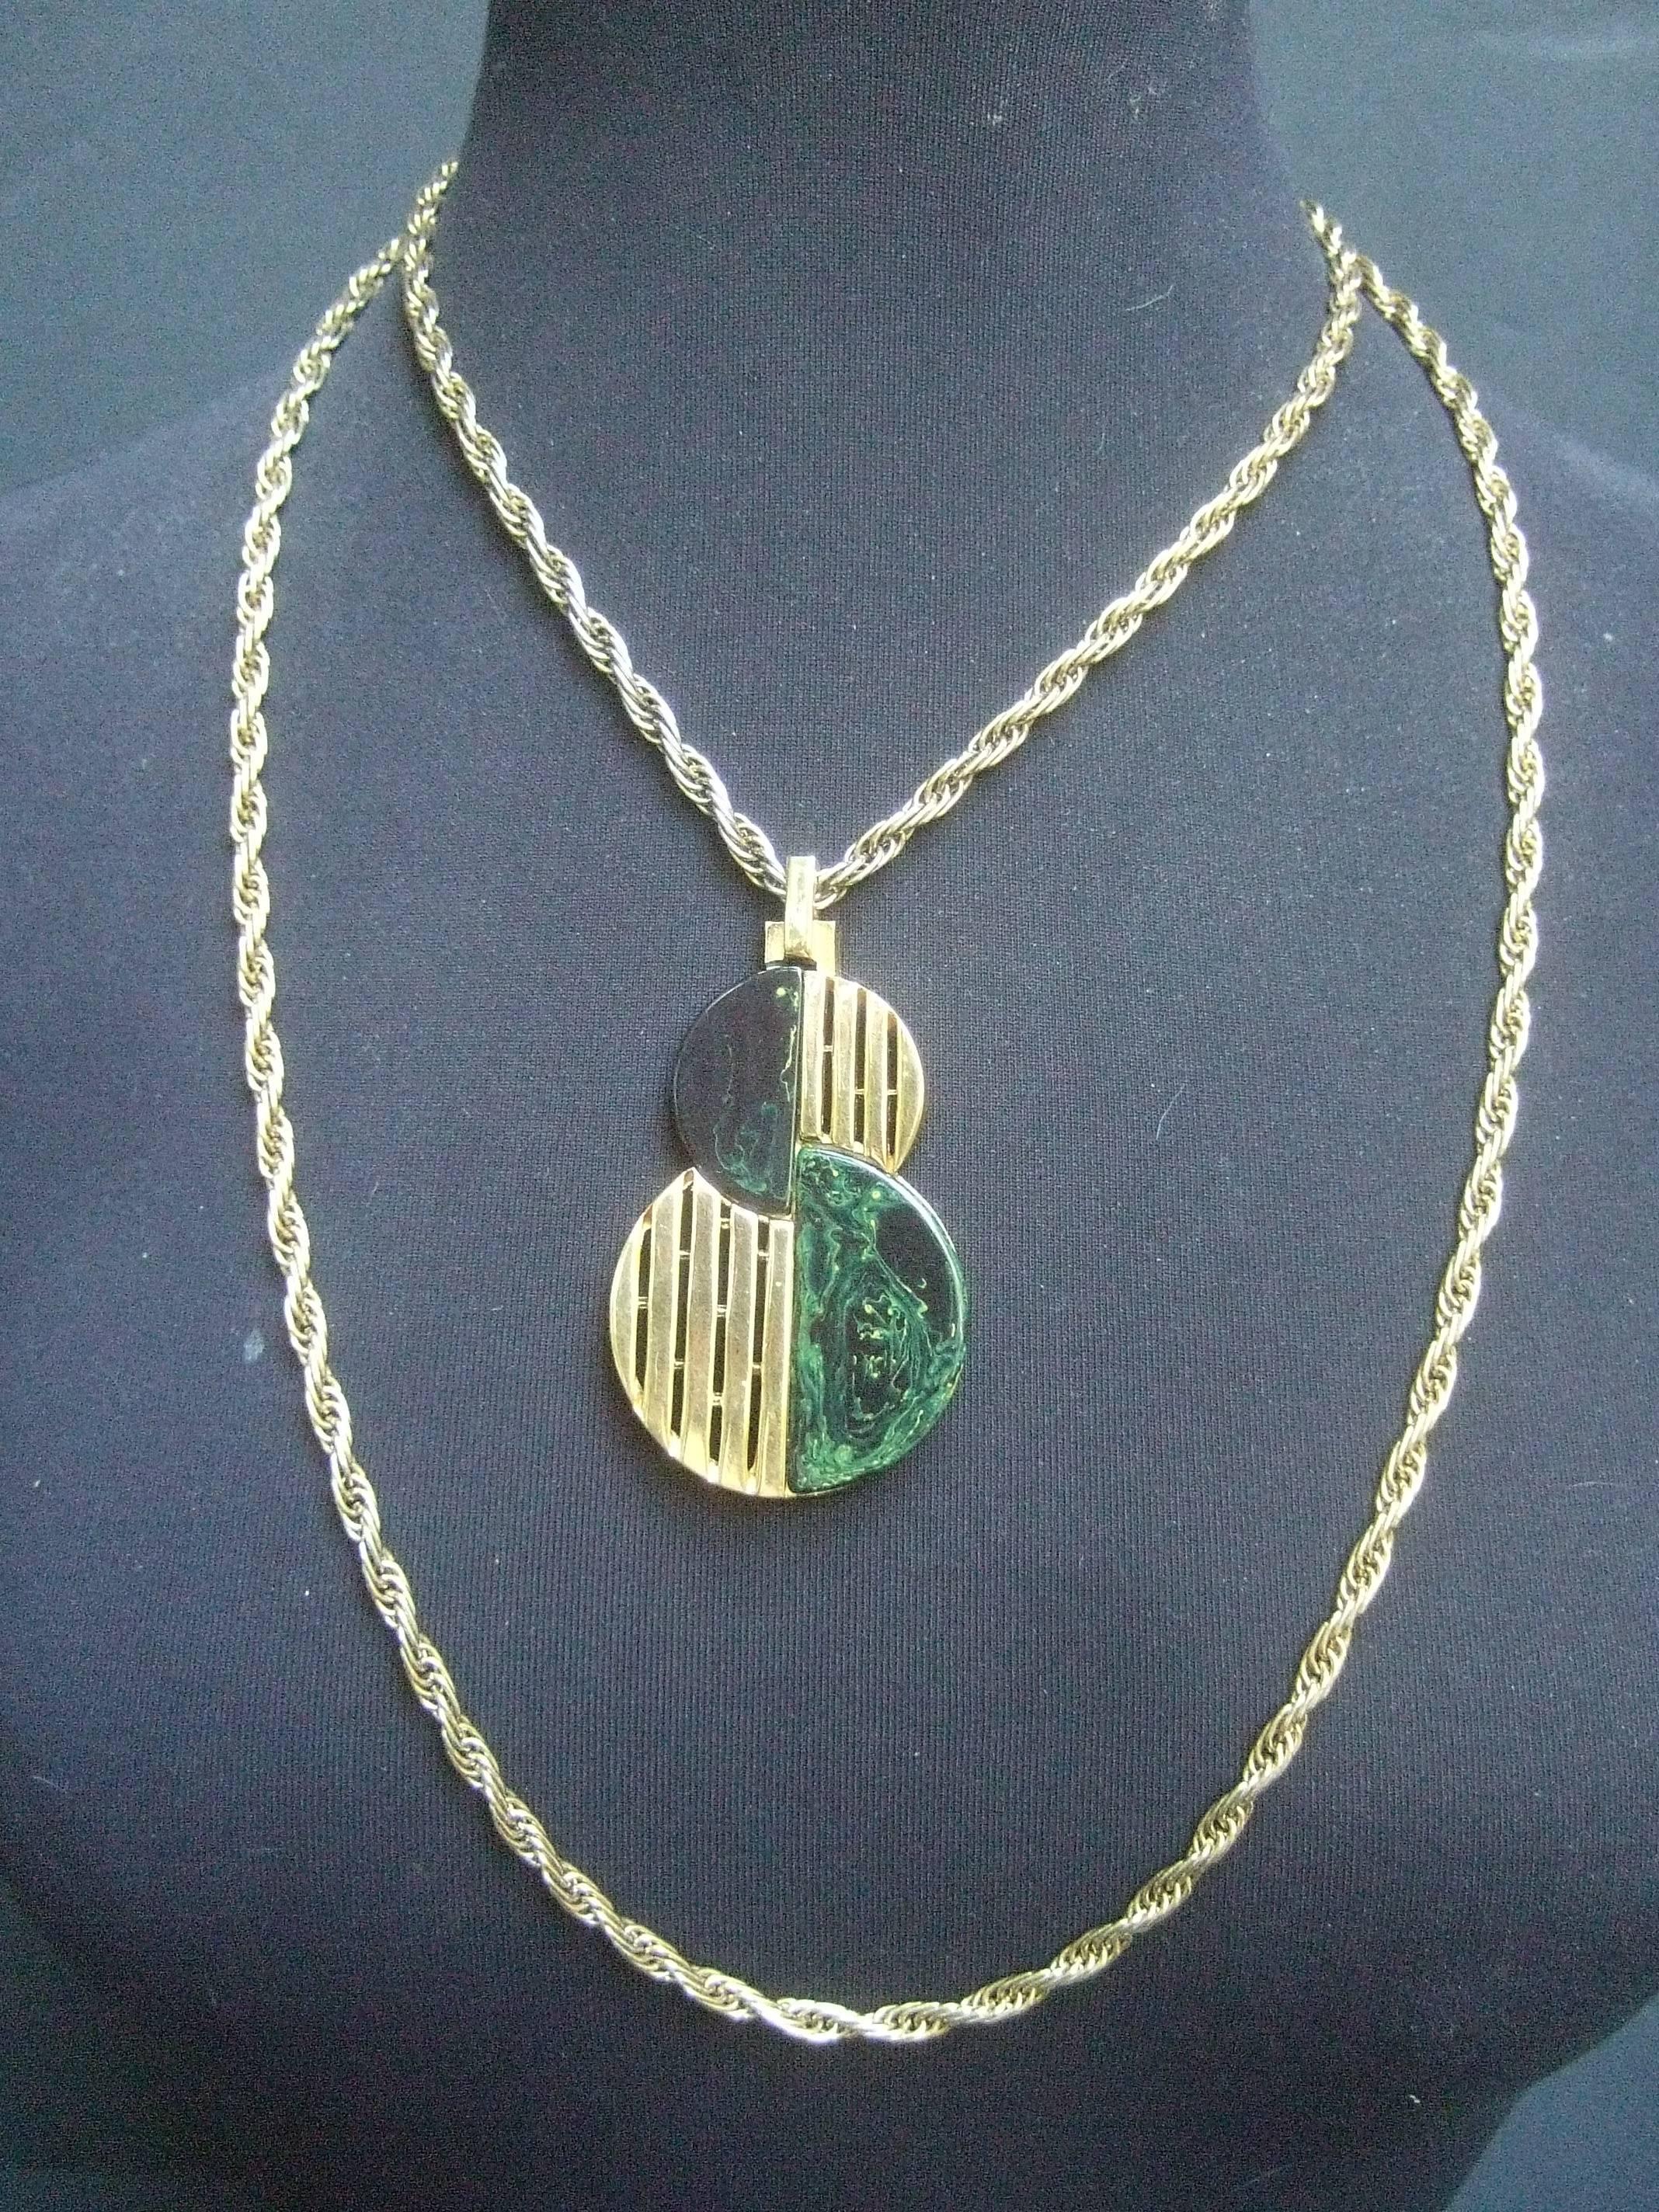 Trifari Sleek gilt metal lucite pendant necklace c 1970
The minimalist necklace is designed with    
a circular pendant

The severe pendant is designed with vertical
gilt metal bands juxtaposed with green lucite
marbleized tiles that emulate